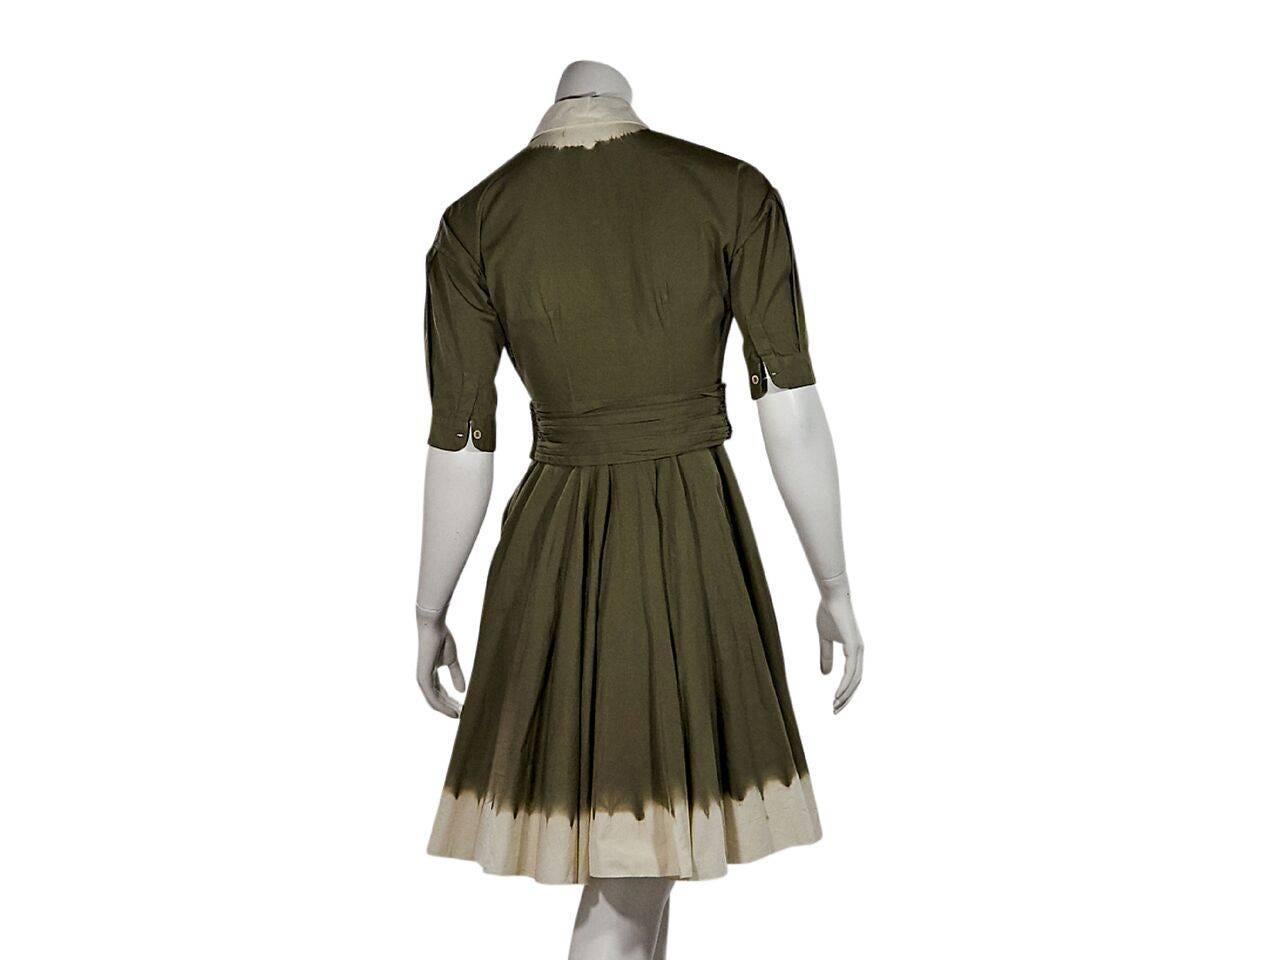 Product details:  Green pleated fit-and-flare dress by Prada.  Spread collar.  Elbow-length sleeves.  Single button cuff.  Concealed button front and side zip closure.  Pleated banded waist.  Flared skirting with a dip-dyed hem. 
Condition: